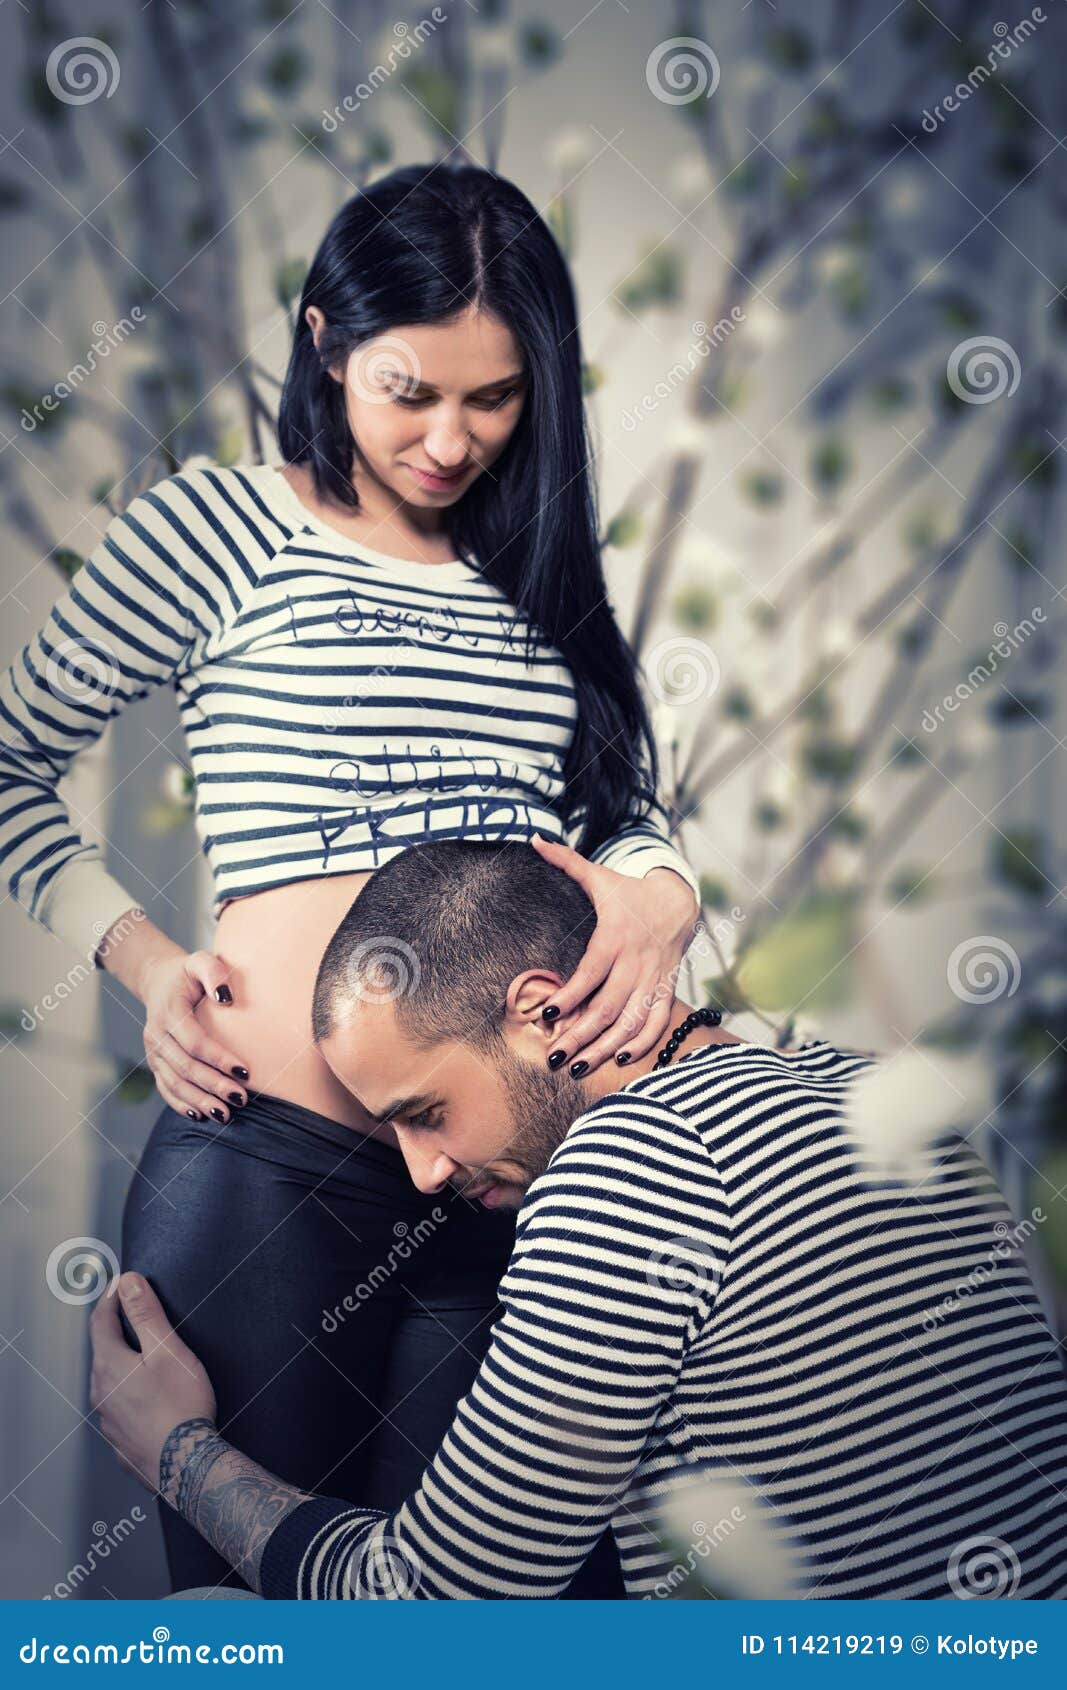 https://thumbs.dreamstime.com/z/charming-international-couple-striped-sweaters-look-each-other-muslim-men-sat-down-listening-belly-his-pregnant-114219219.jpg